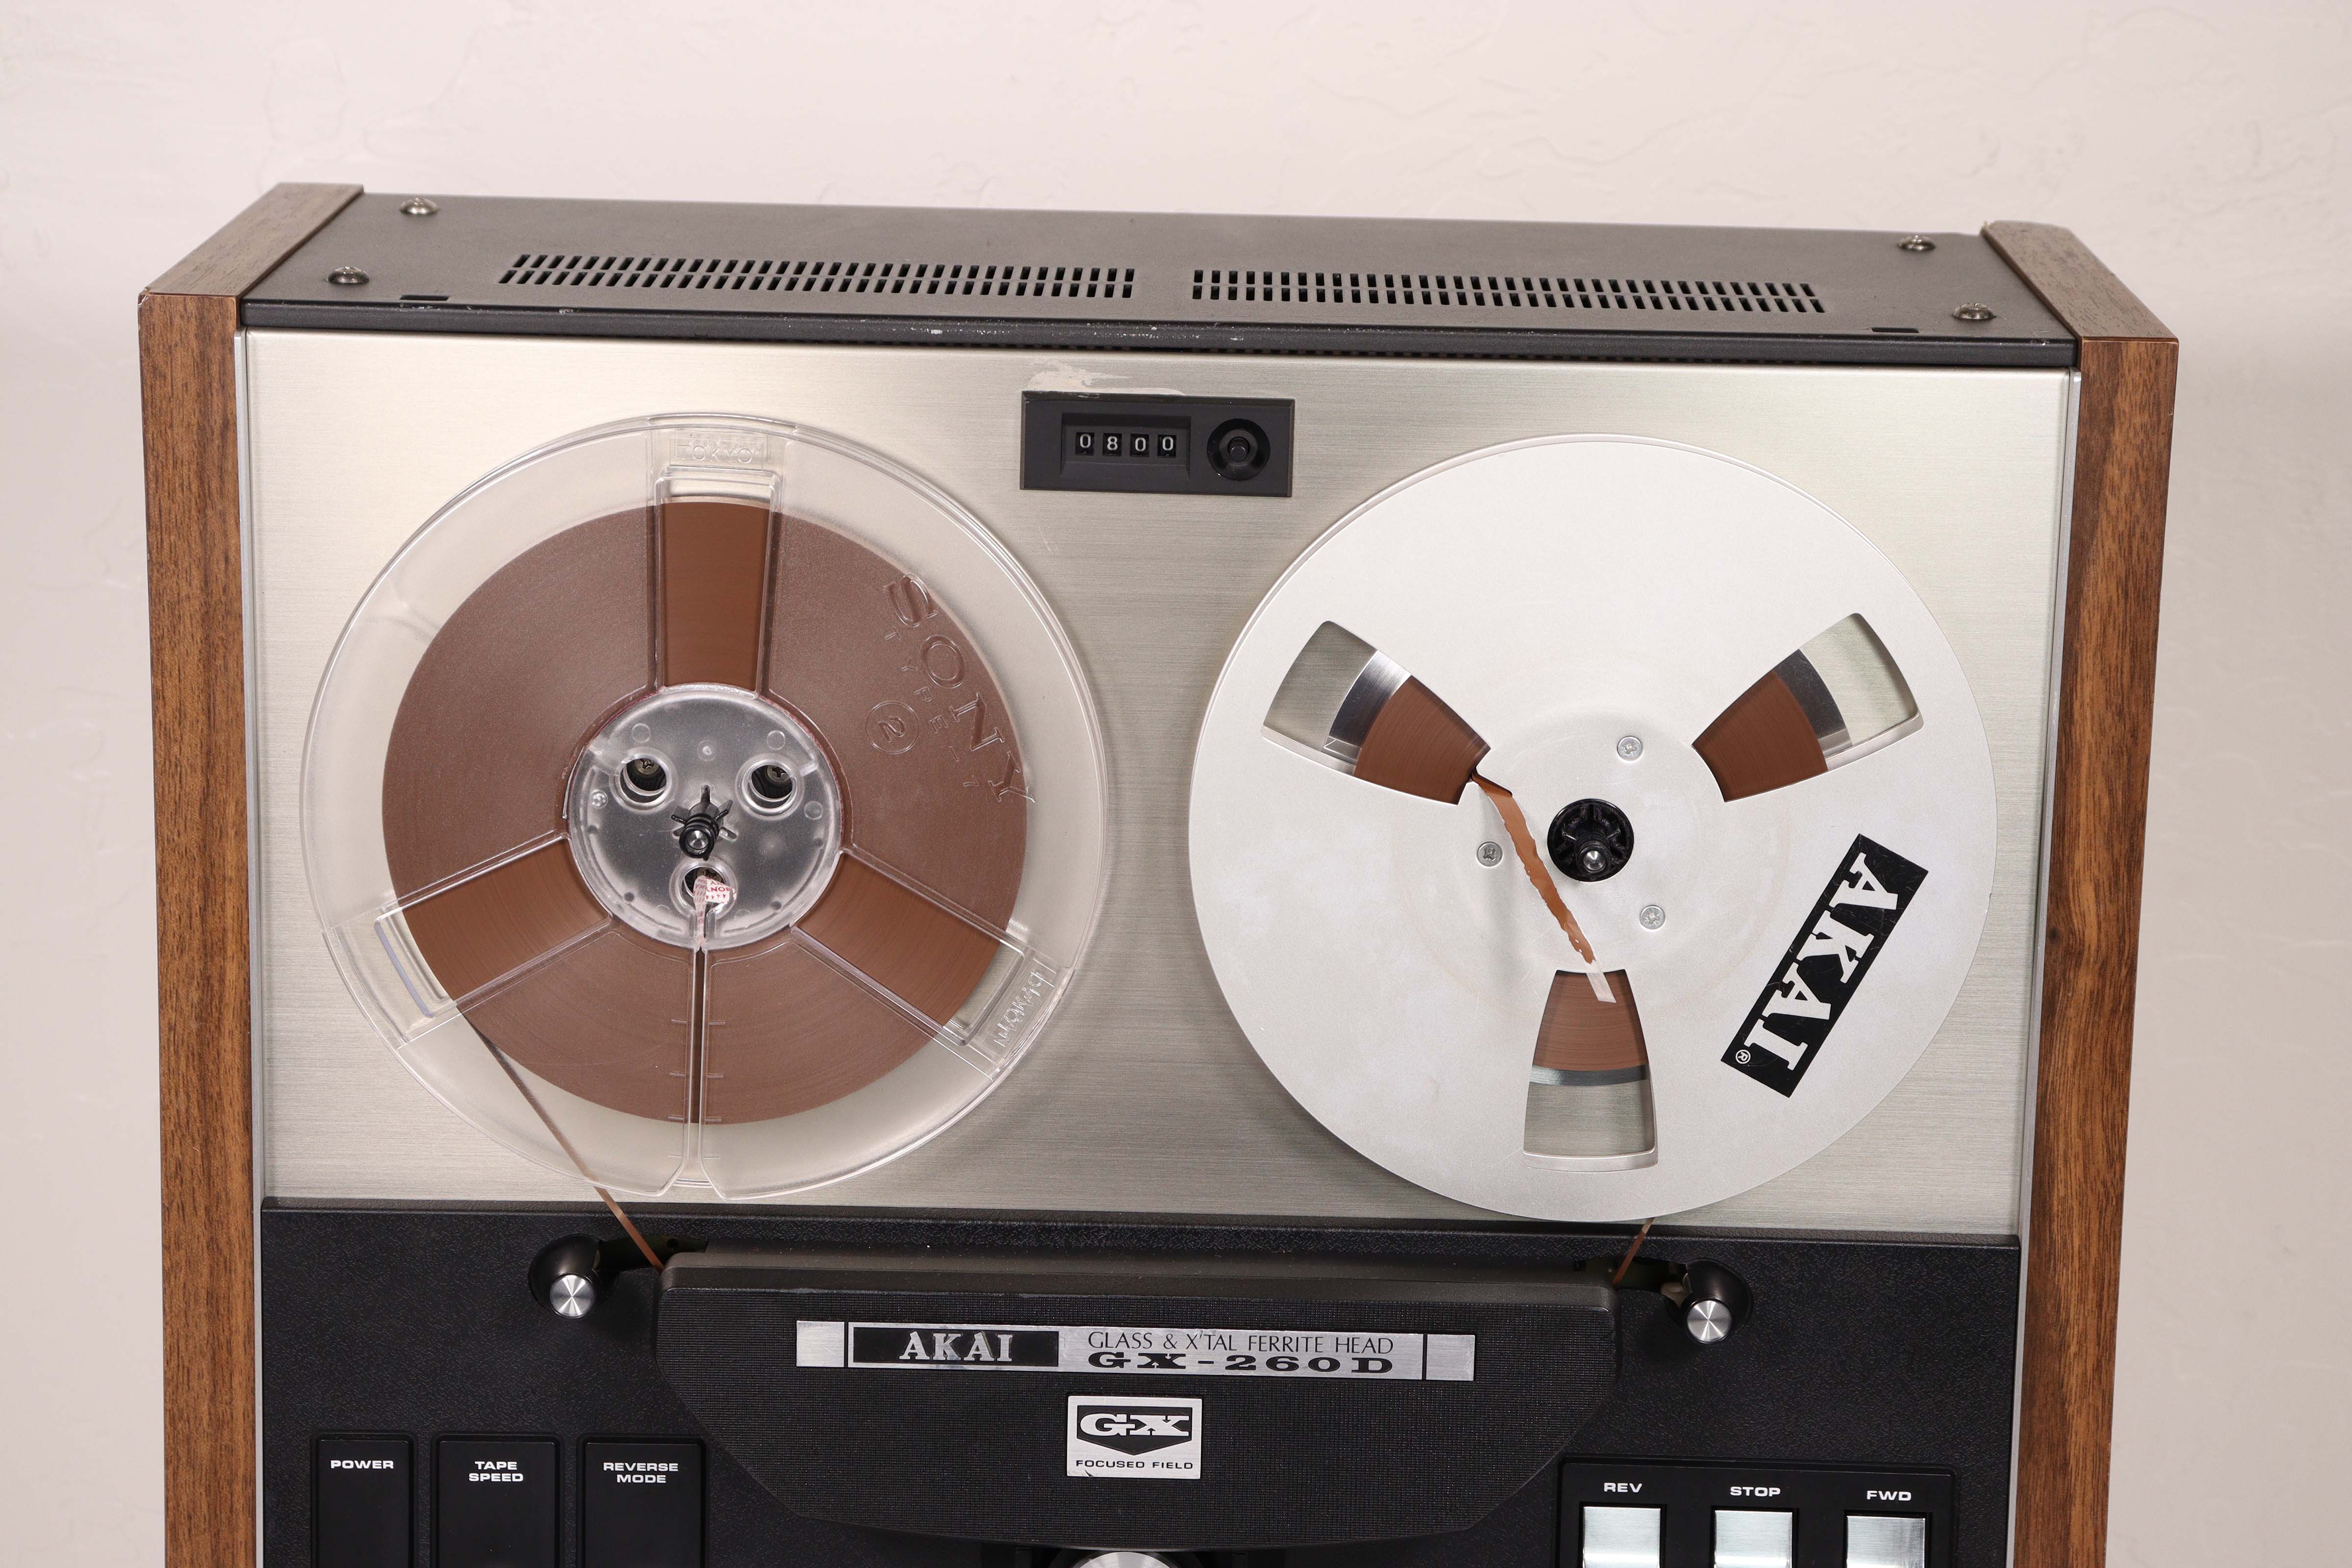 https://spencertified.com/cdn/shop/products/Akai-GX-260D-Reel-To-Reel-Recorder-Player-Deck-Automatic-Reverse-Vintage-FULLY-SPENCERTIFIED-Reel-to-Reel-Tape-Players-Recorders-5.jpg?v=1661893034